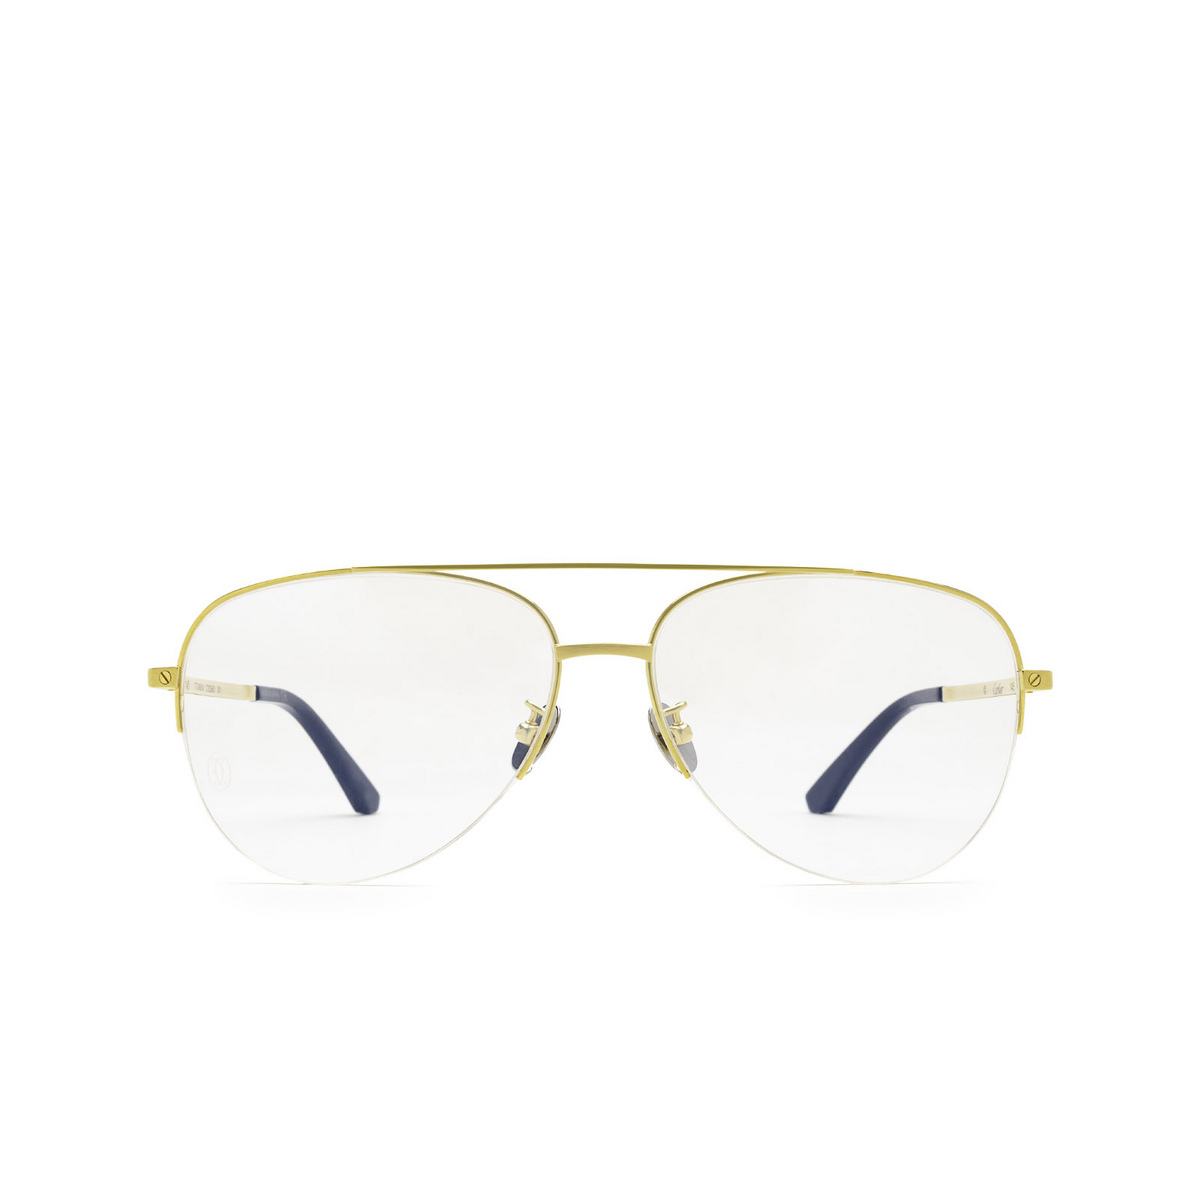 Cartier® Aviator Eyeglasses: CT0256O color 001 Gold - front view